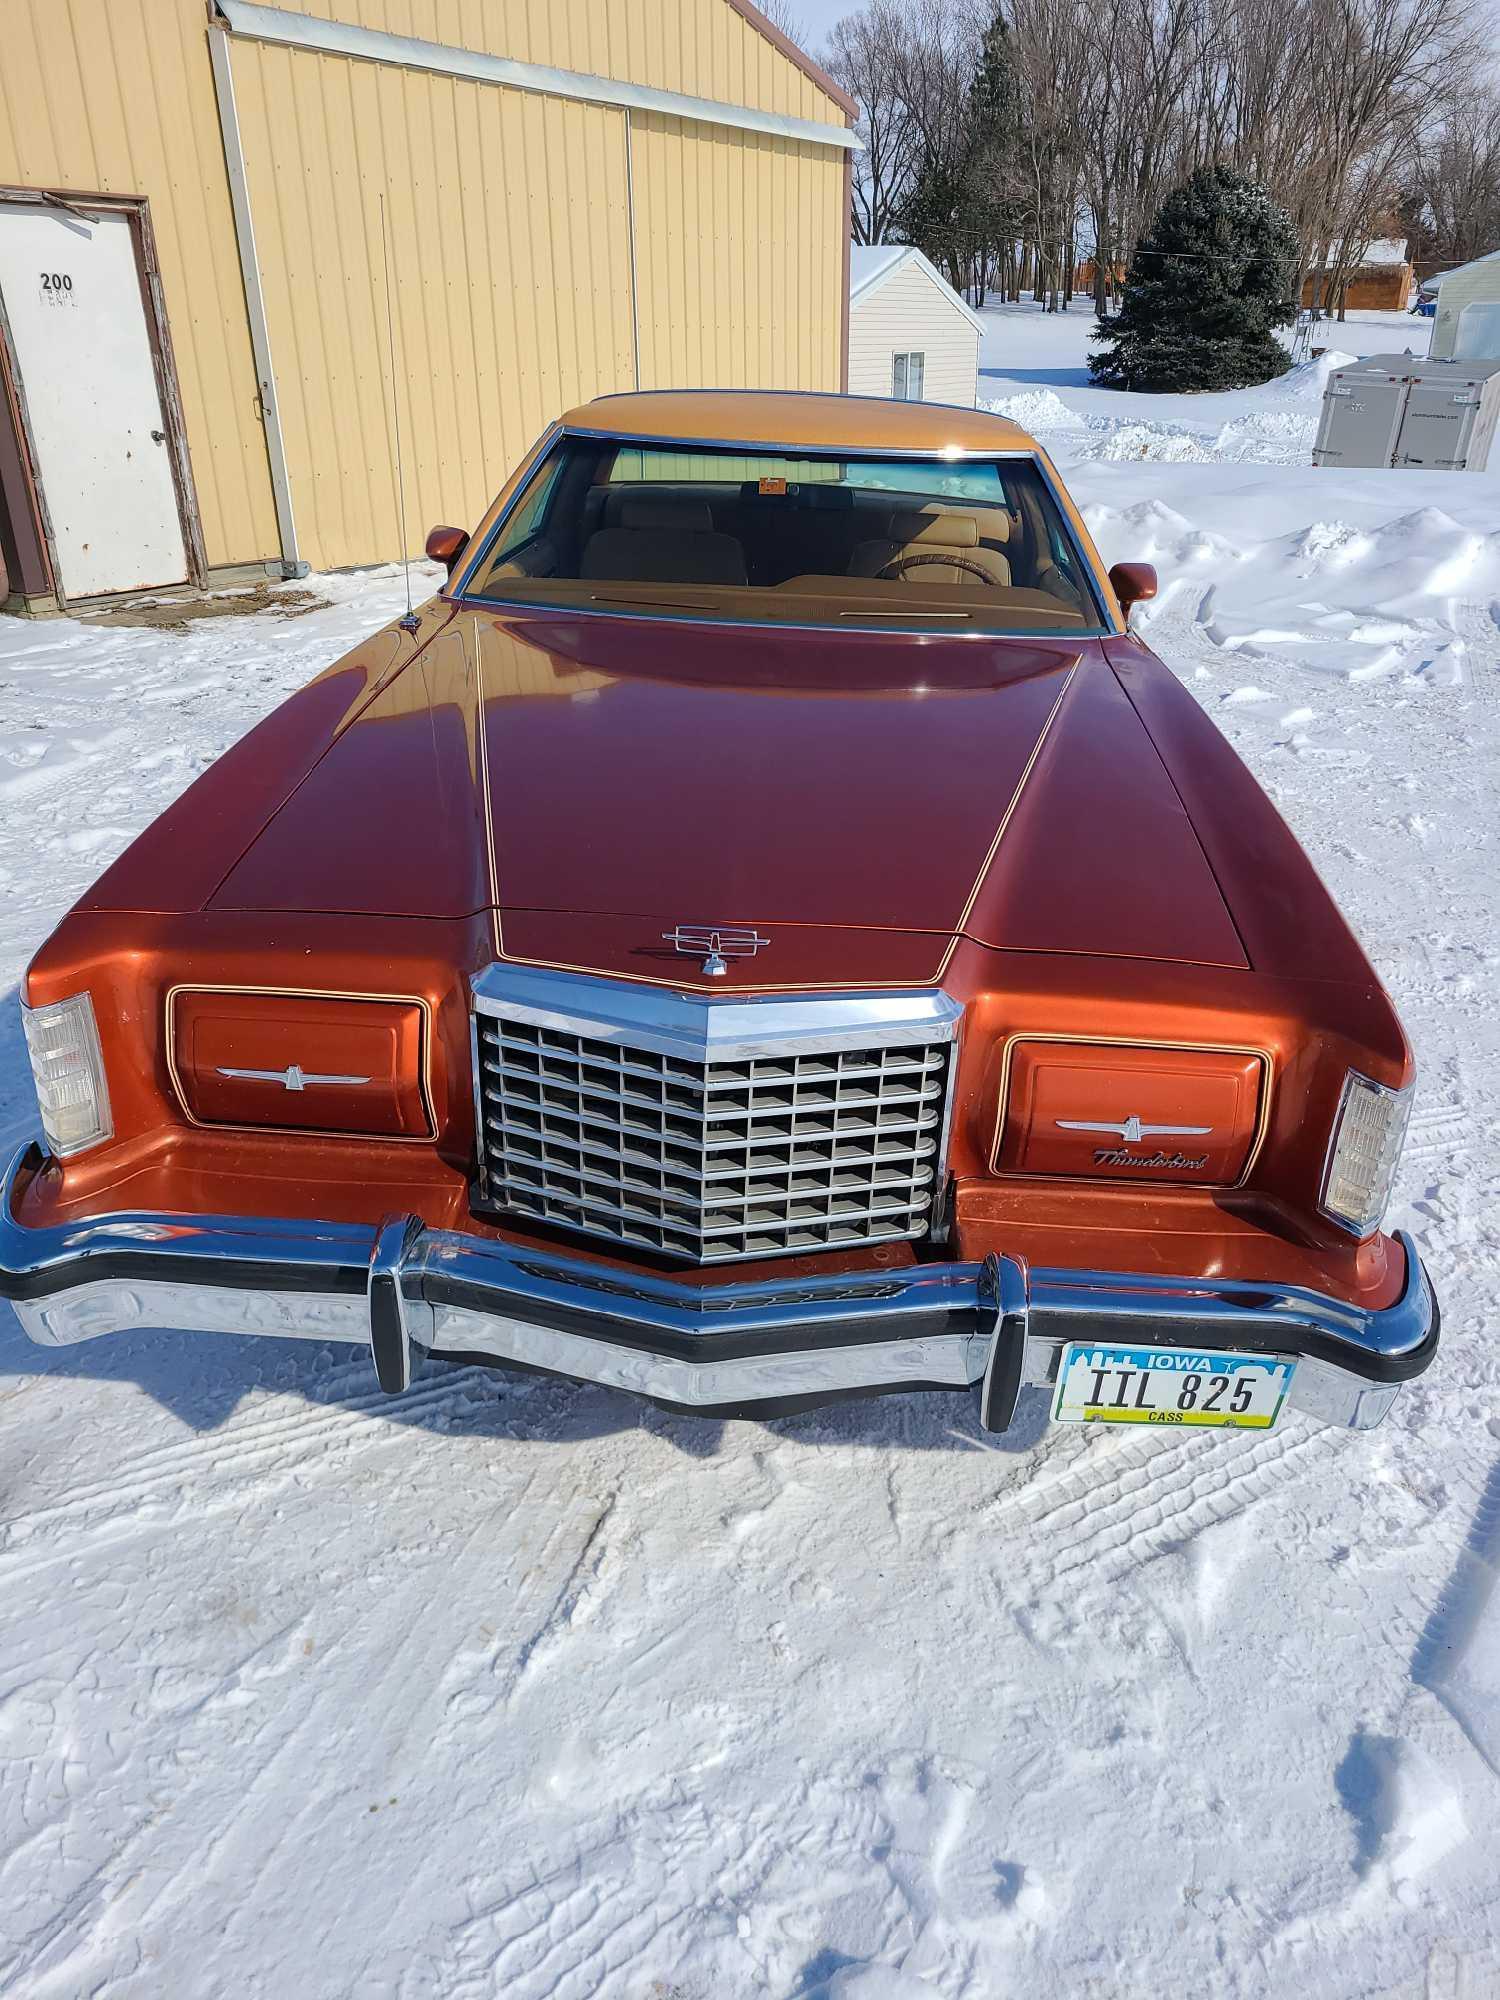 1979 FORD THUNDERBIRD 2 DR HARDTOP - ONE OWNER